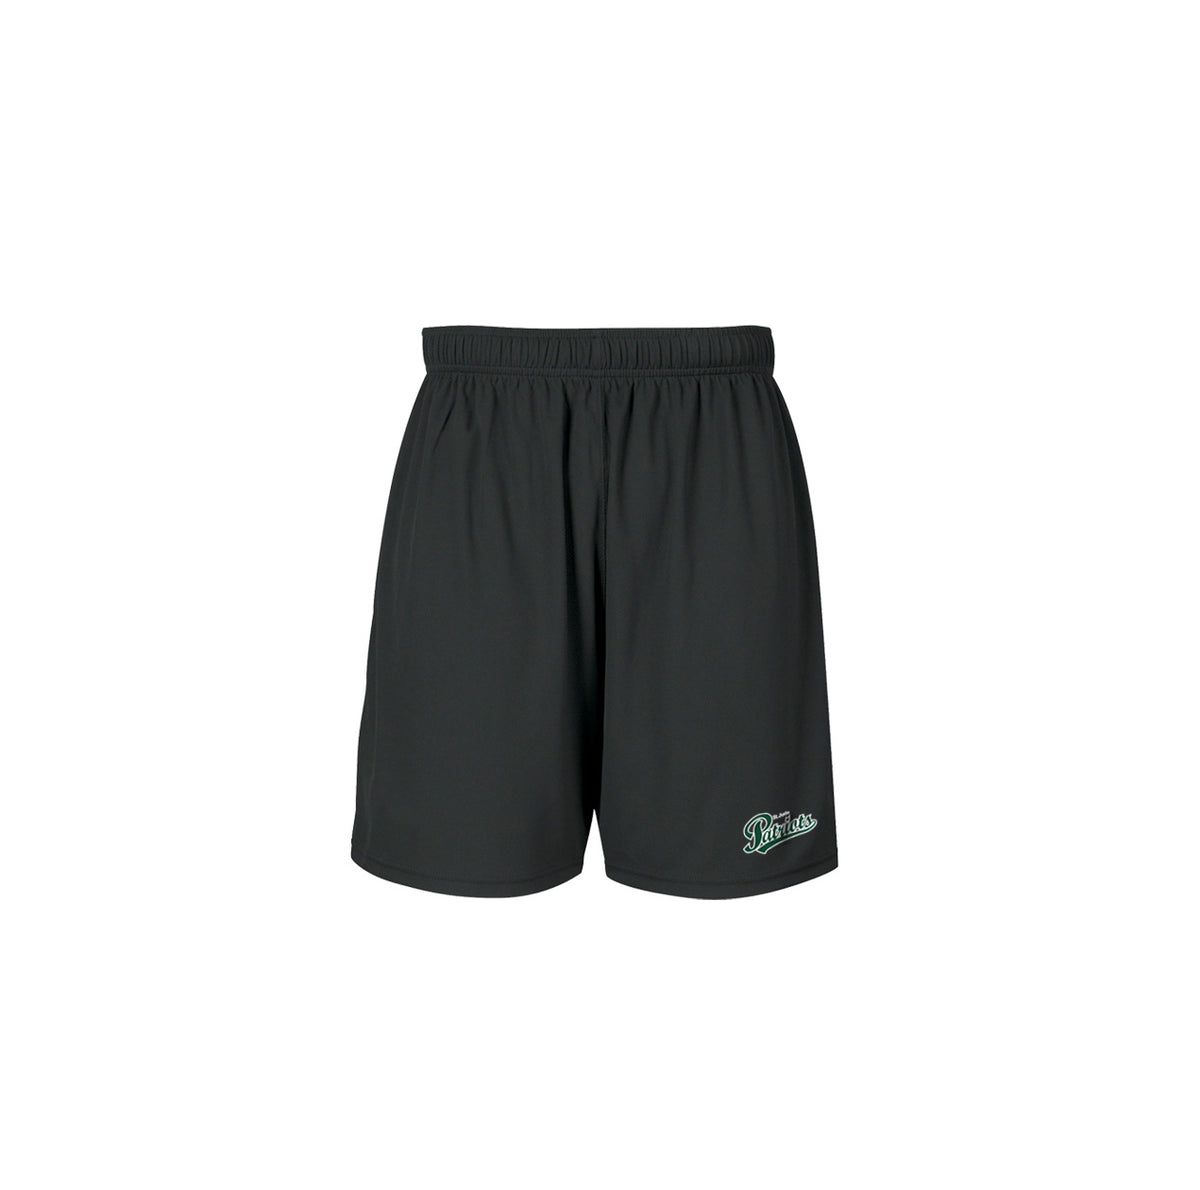 ST. JUDE SCHOOL GYM SHORTS, WICKING, YOUTH